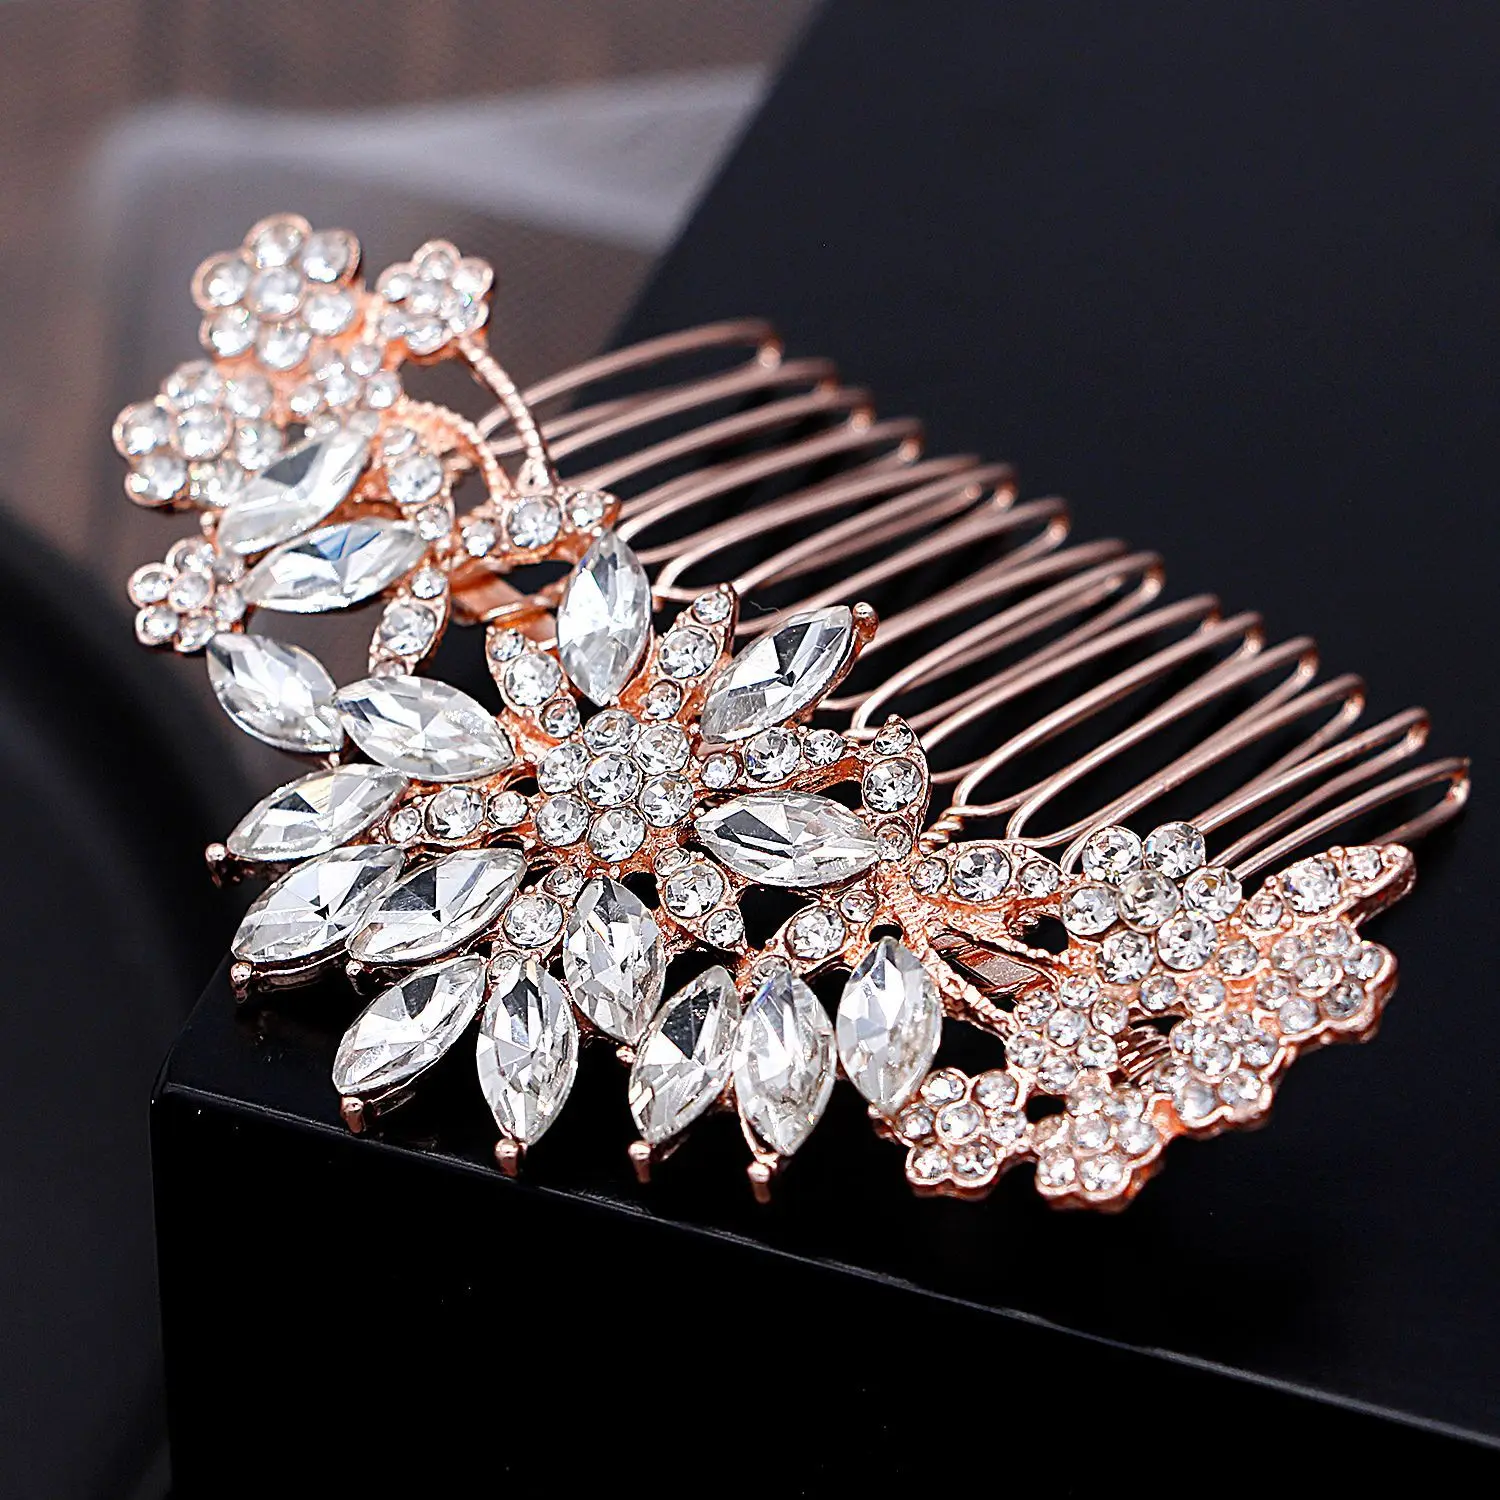 

Wedding Luxury Crystal Peals Hair Combs Bridal Hair Clips Accessories Jewelry Handmade Women Head Ornaments Headpieces For Bride